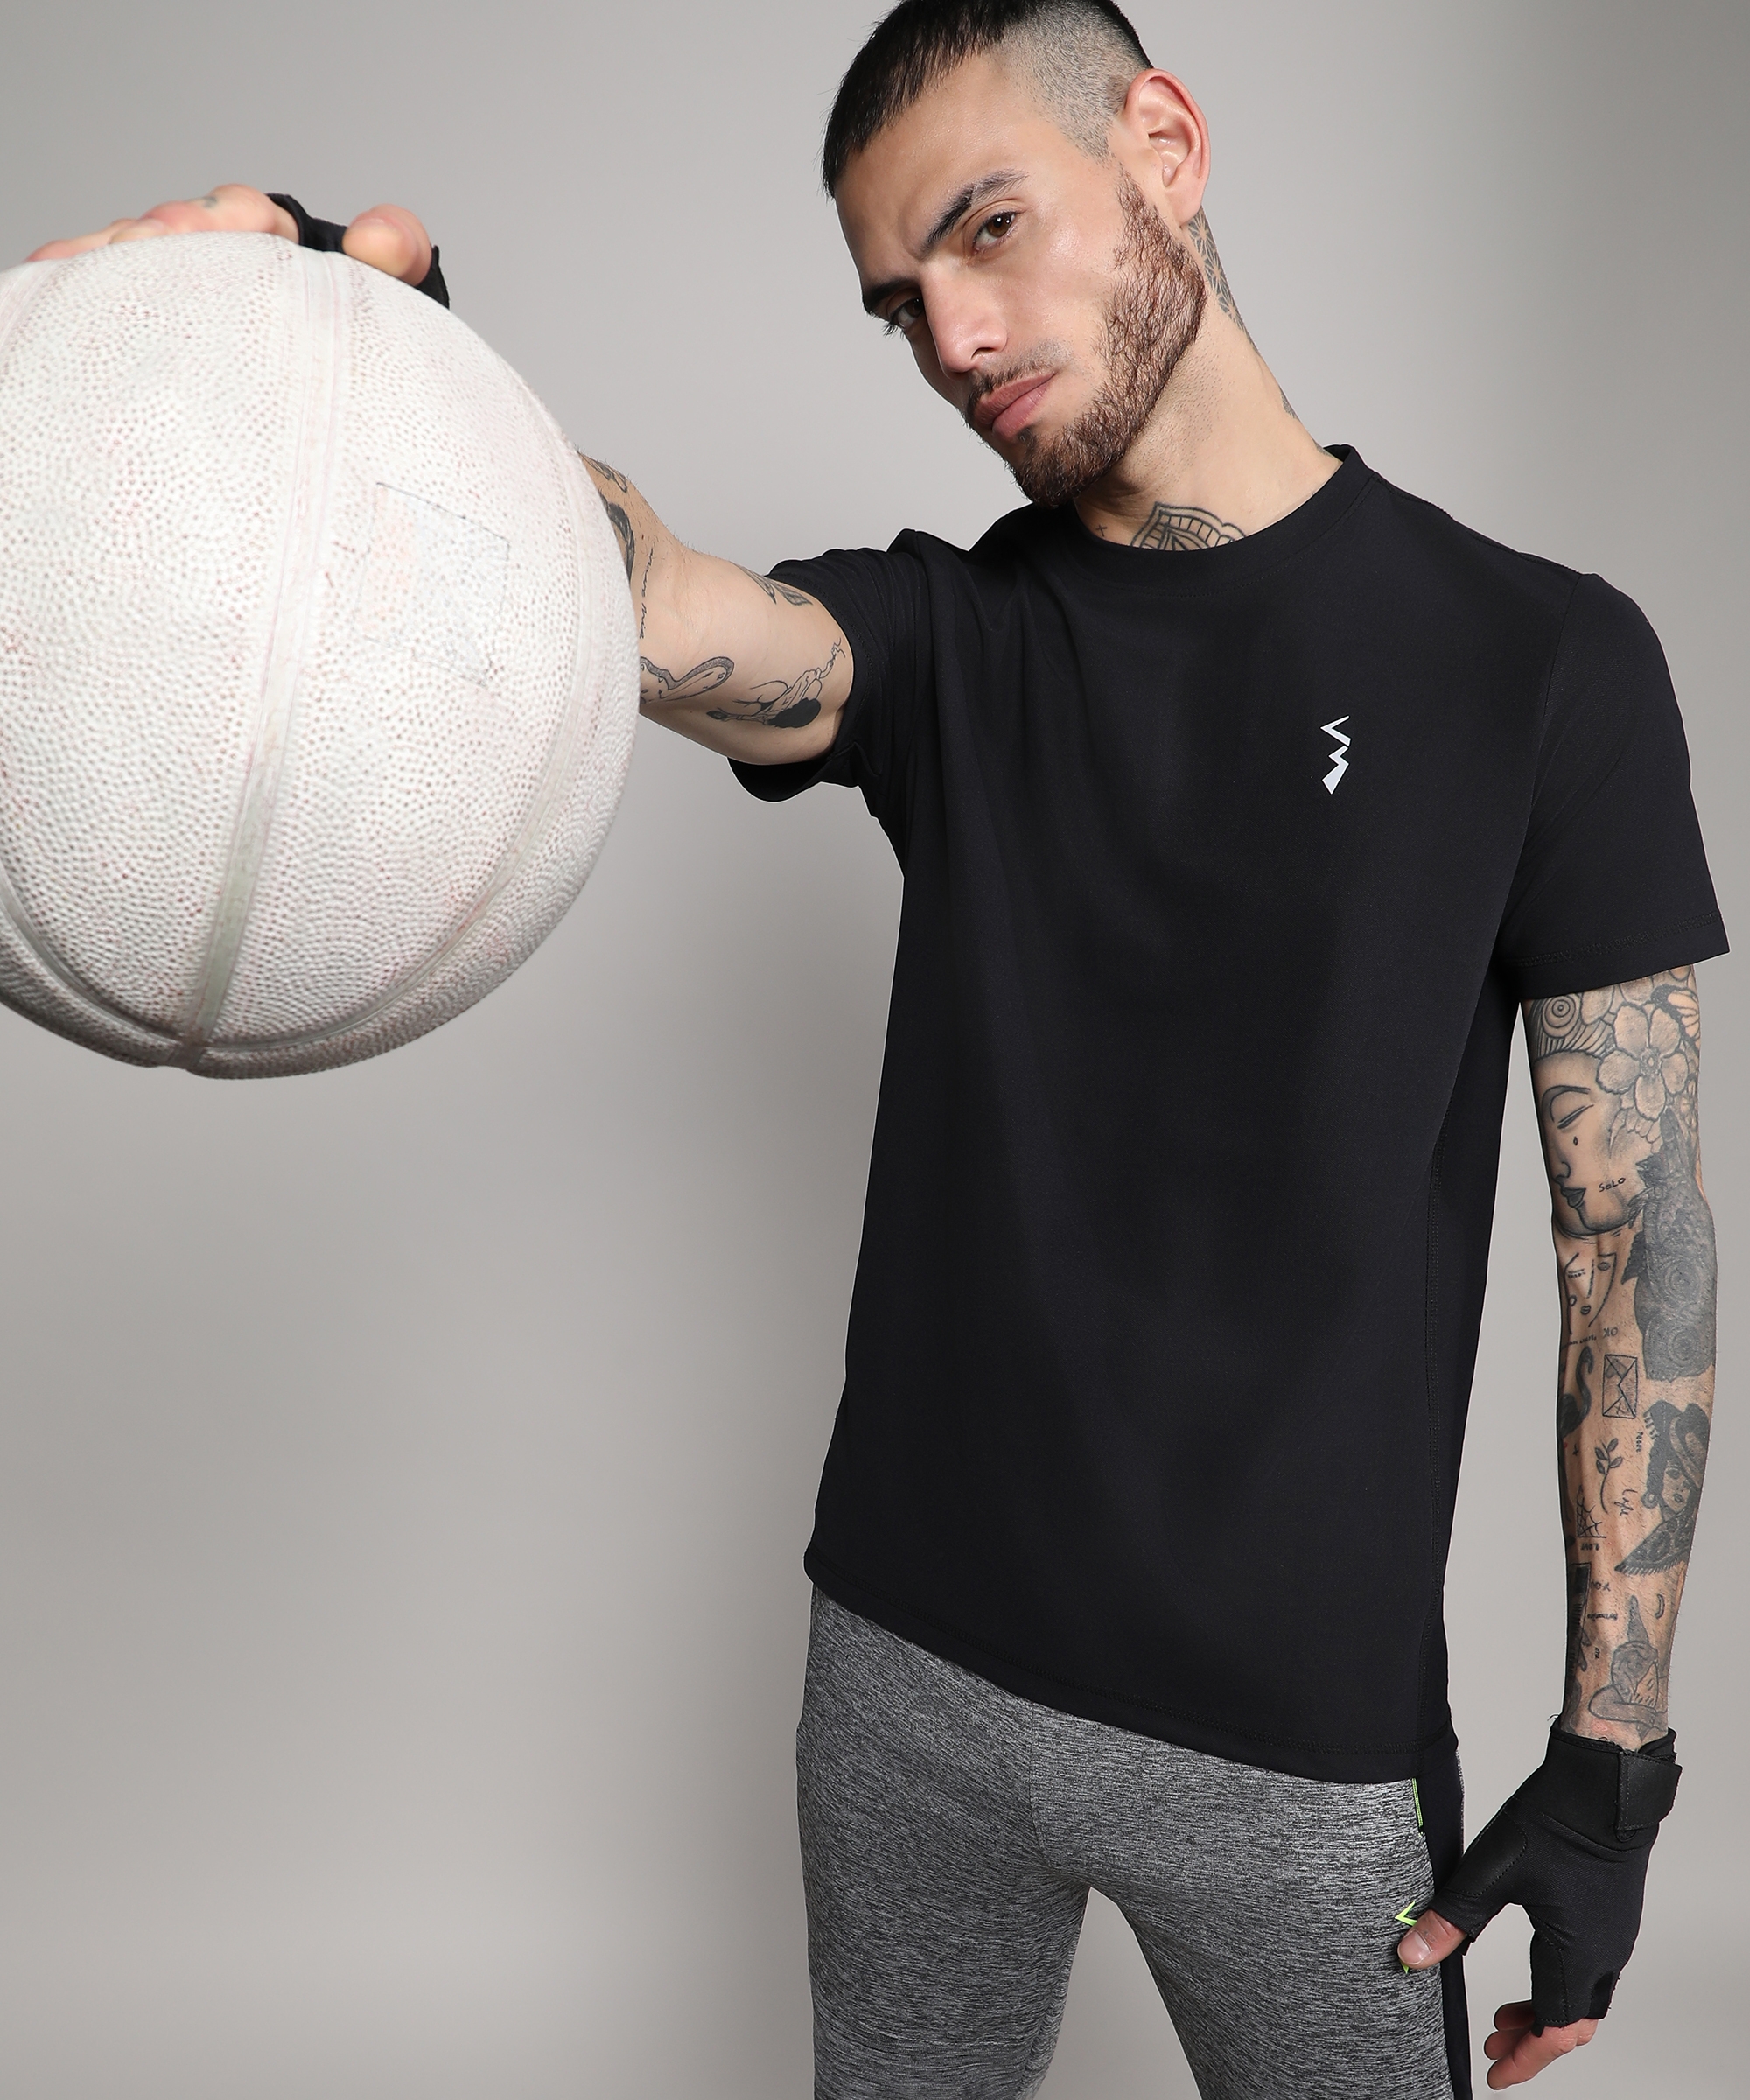 CAMPUS SUTRA | Men's Onyx Black Solid Activewear T-Shirt